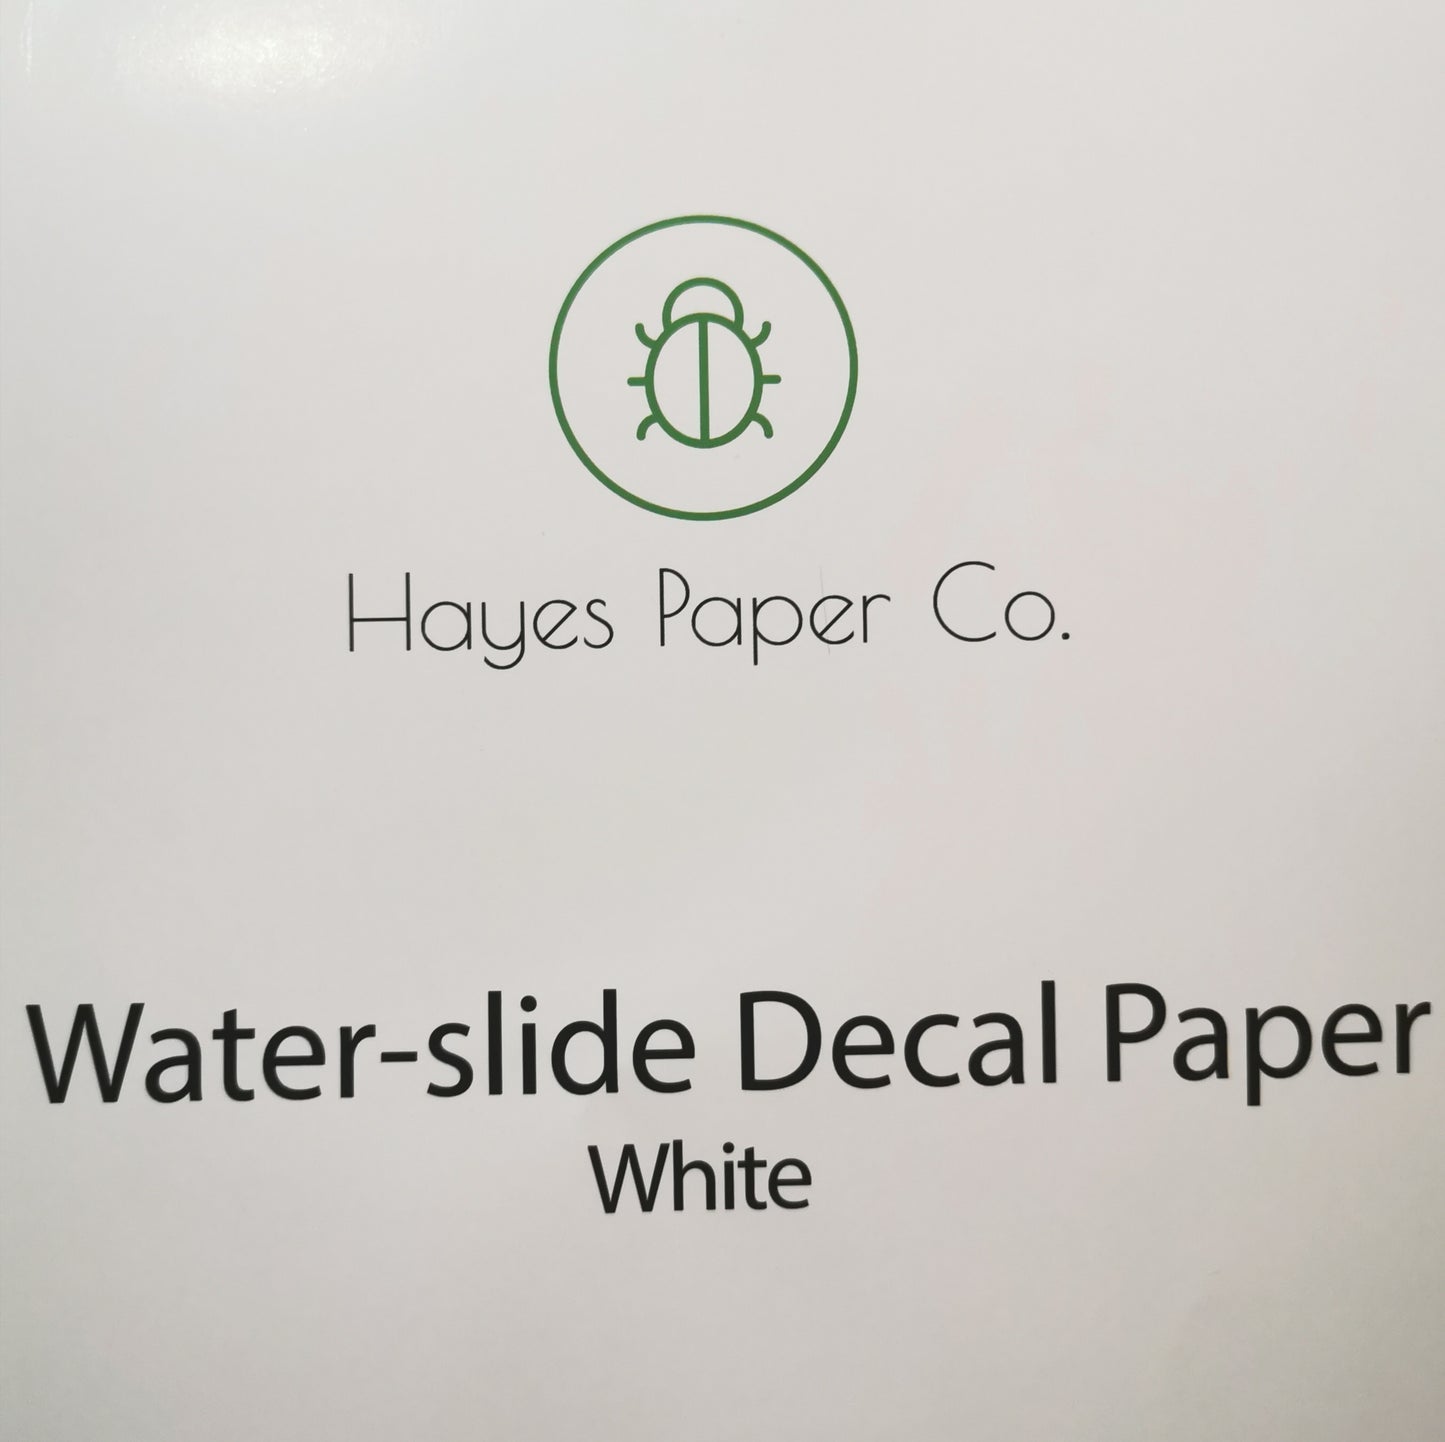 Water-slide Decal Paper - White